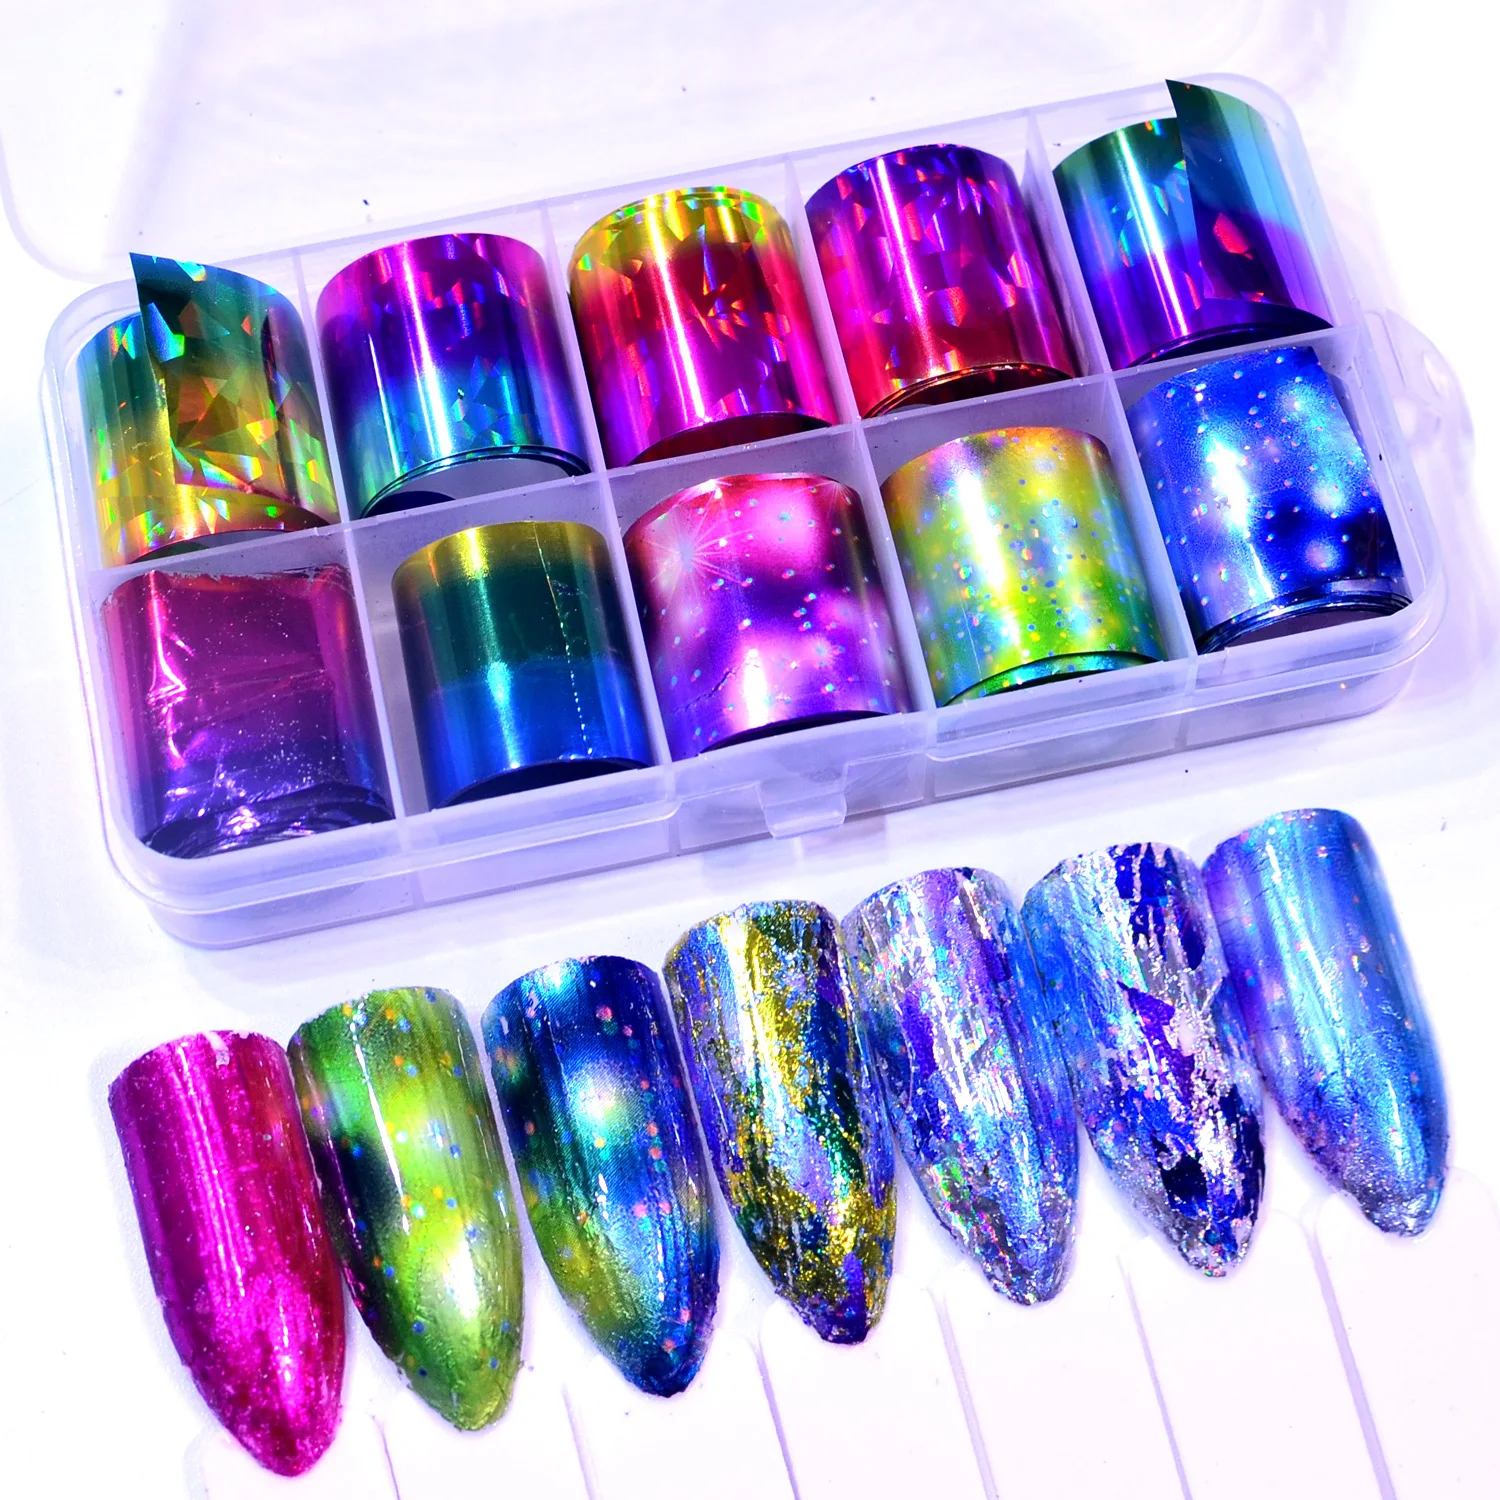 

YWK 10 Rolls/Box Holographic Nail Foils Nails Wraps Multi-pattern Colorful Transfer Sticker Decals Tips Nail Art Decorations